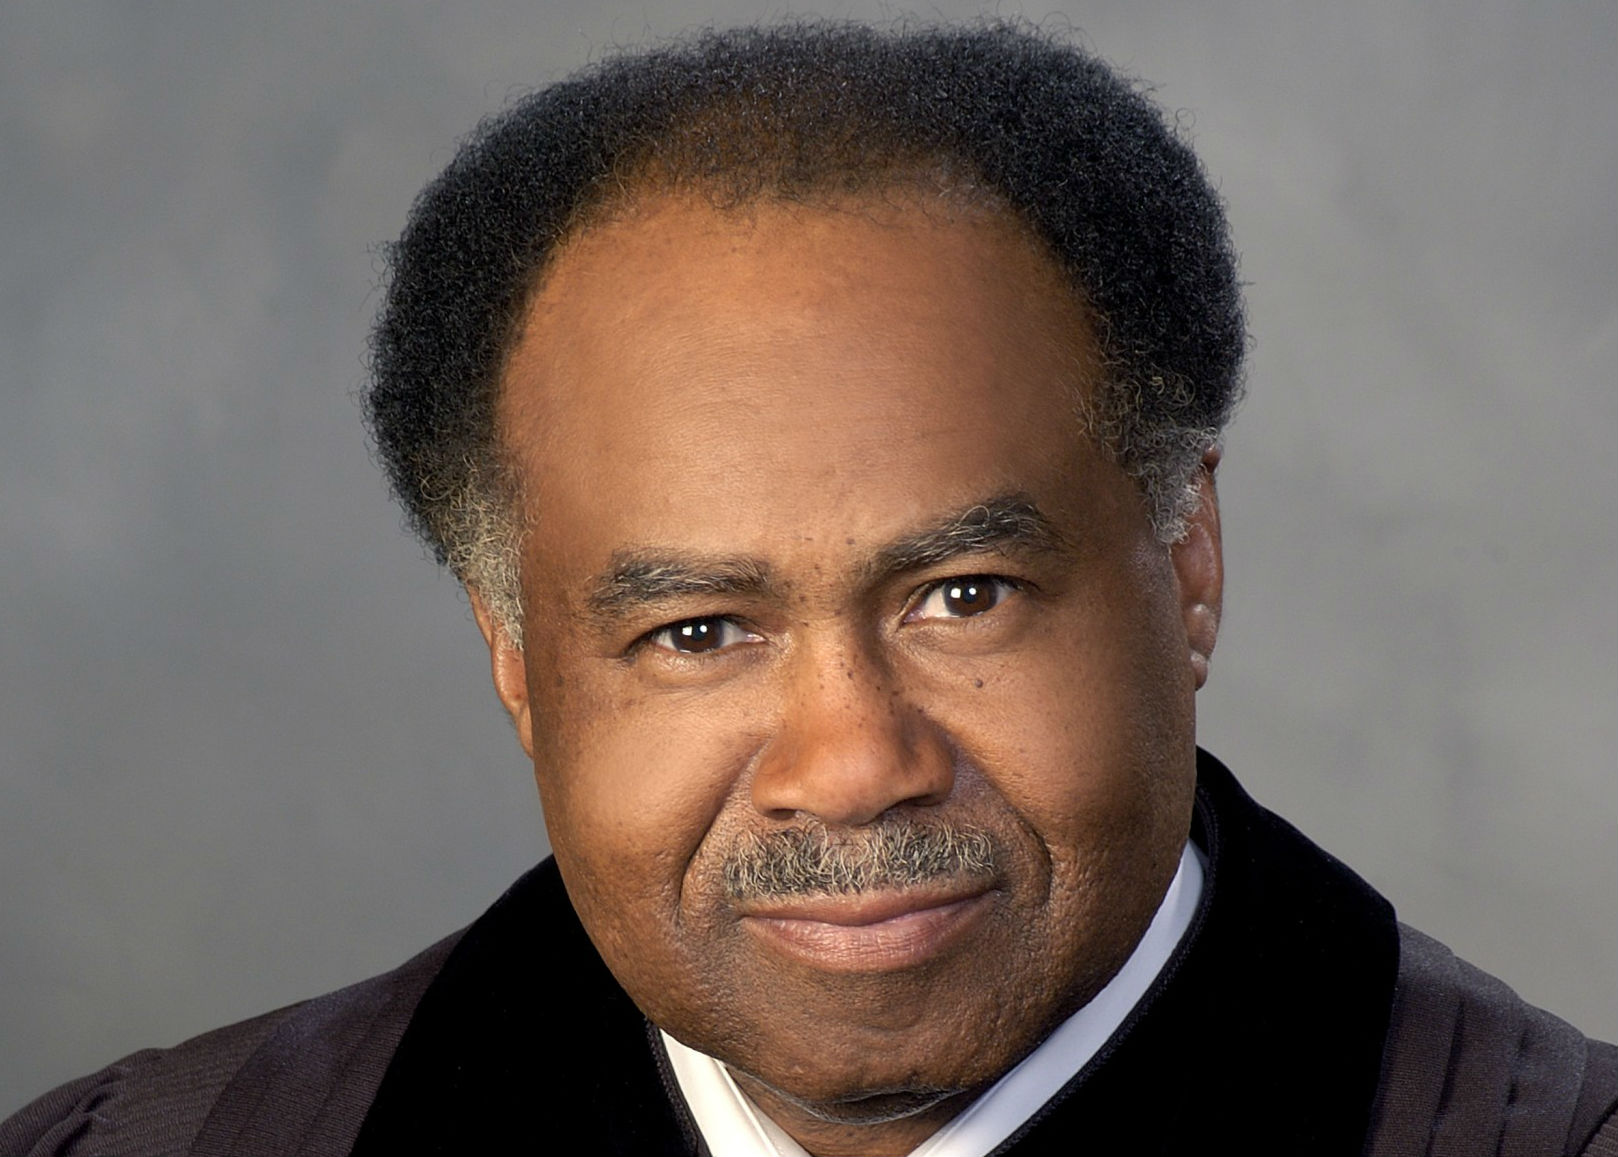 Georgia's First Black Supreme Court Justice To Step Down After Serving Nearly Three Decades